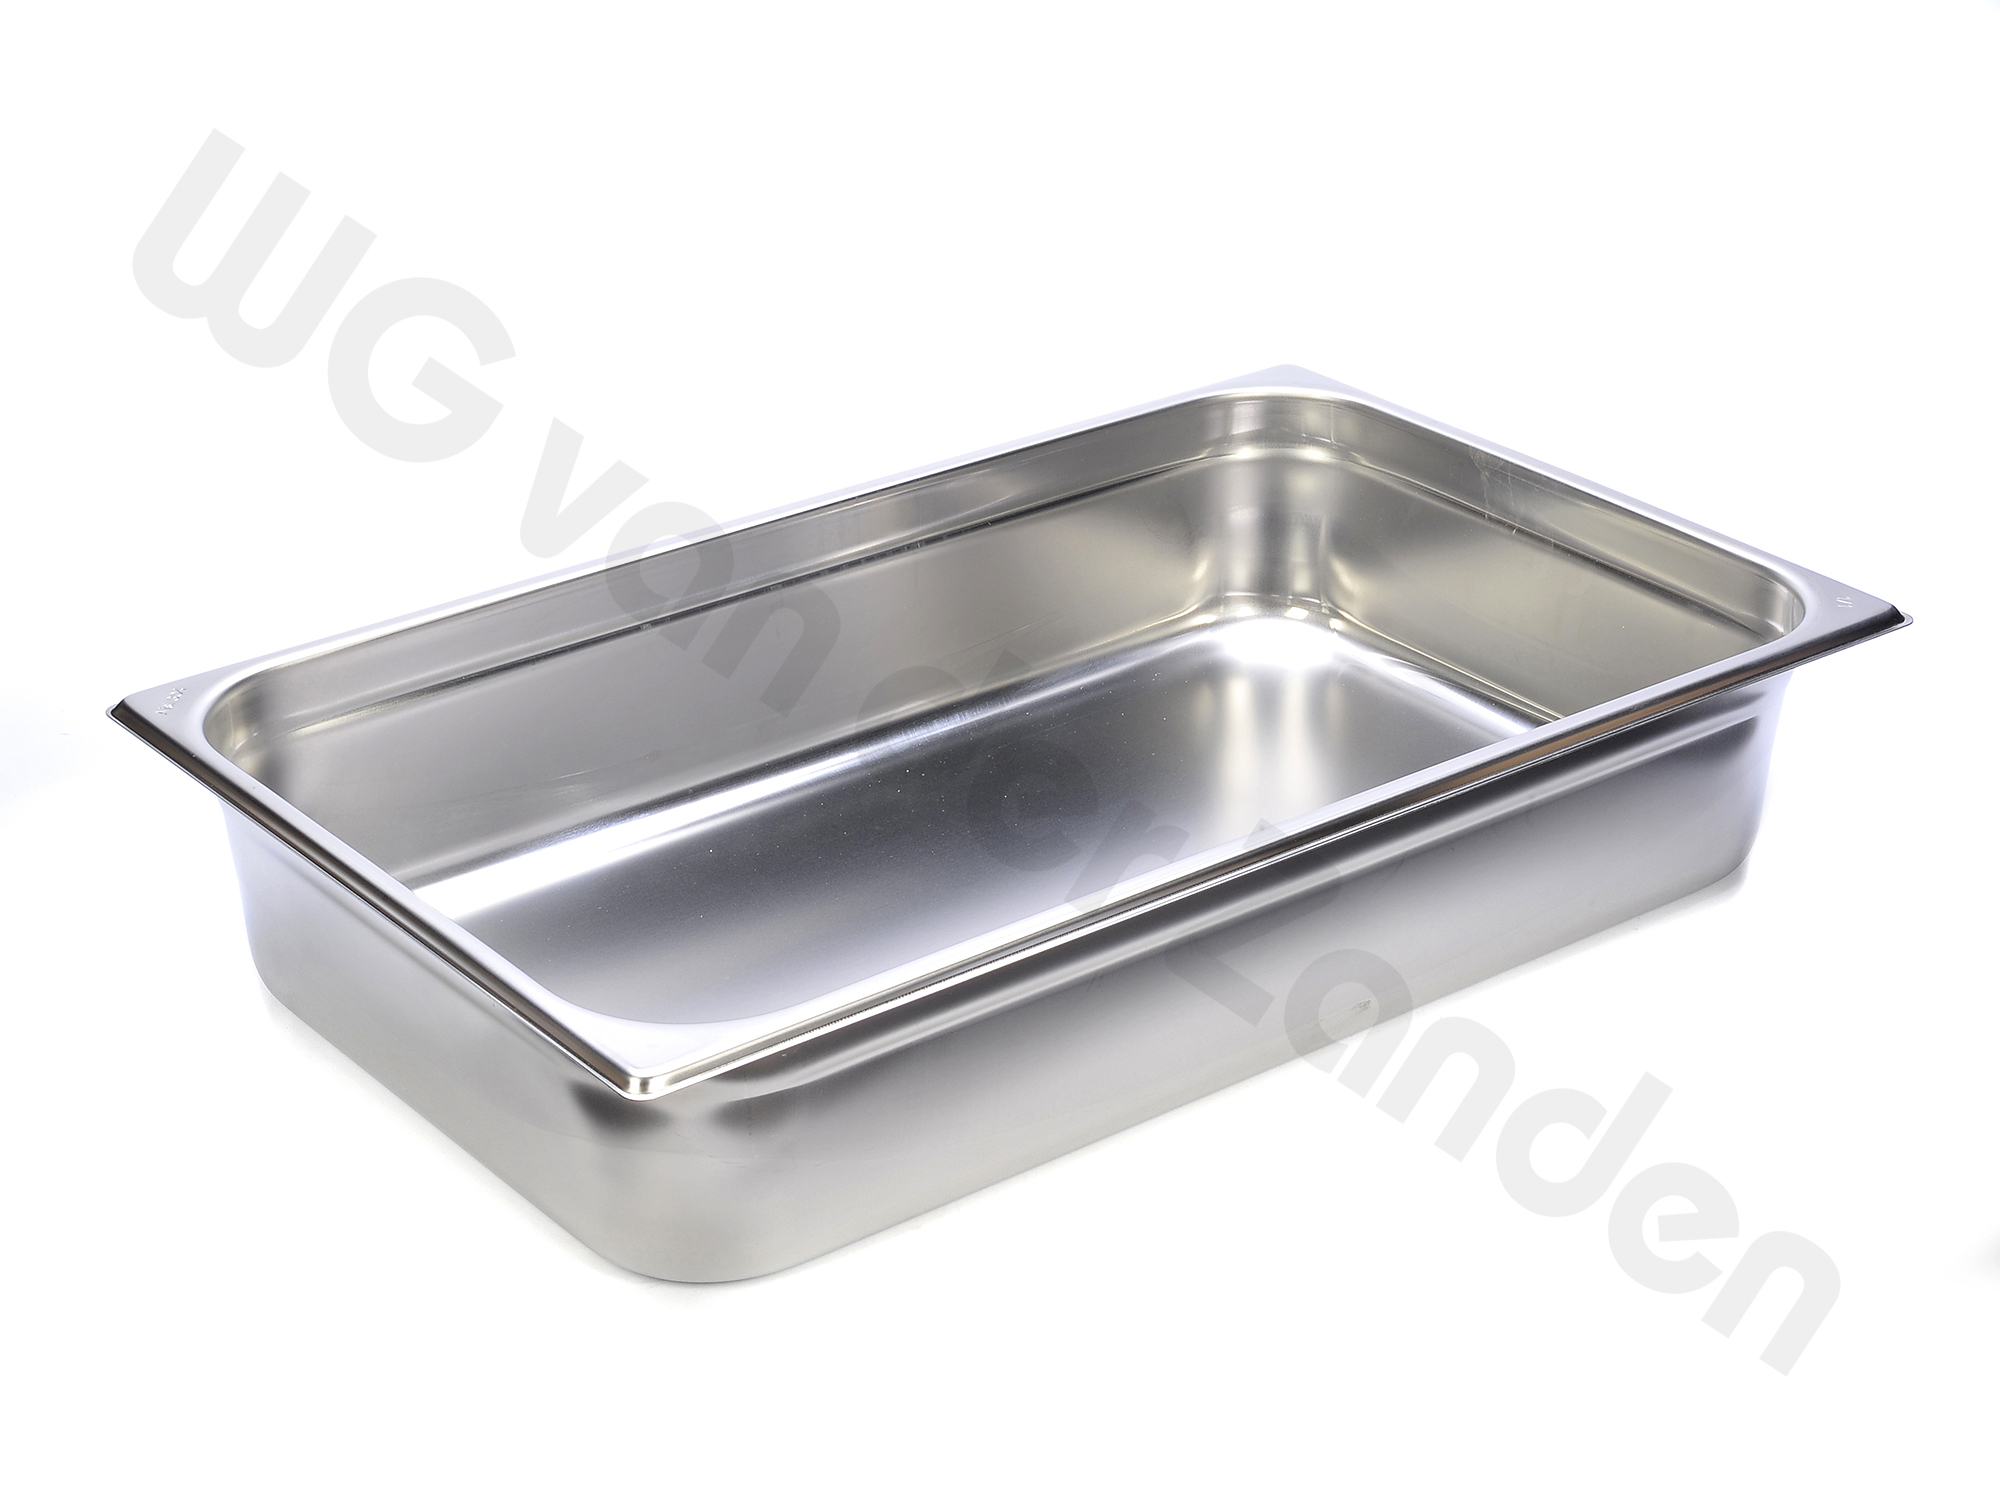 257922 GASTRONORM PAN S/S 1/2 X 6.5CM